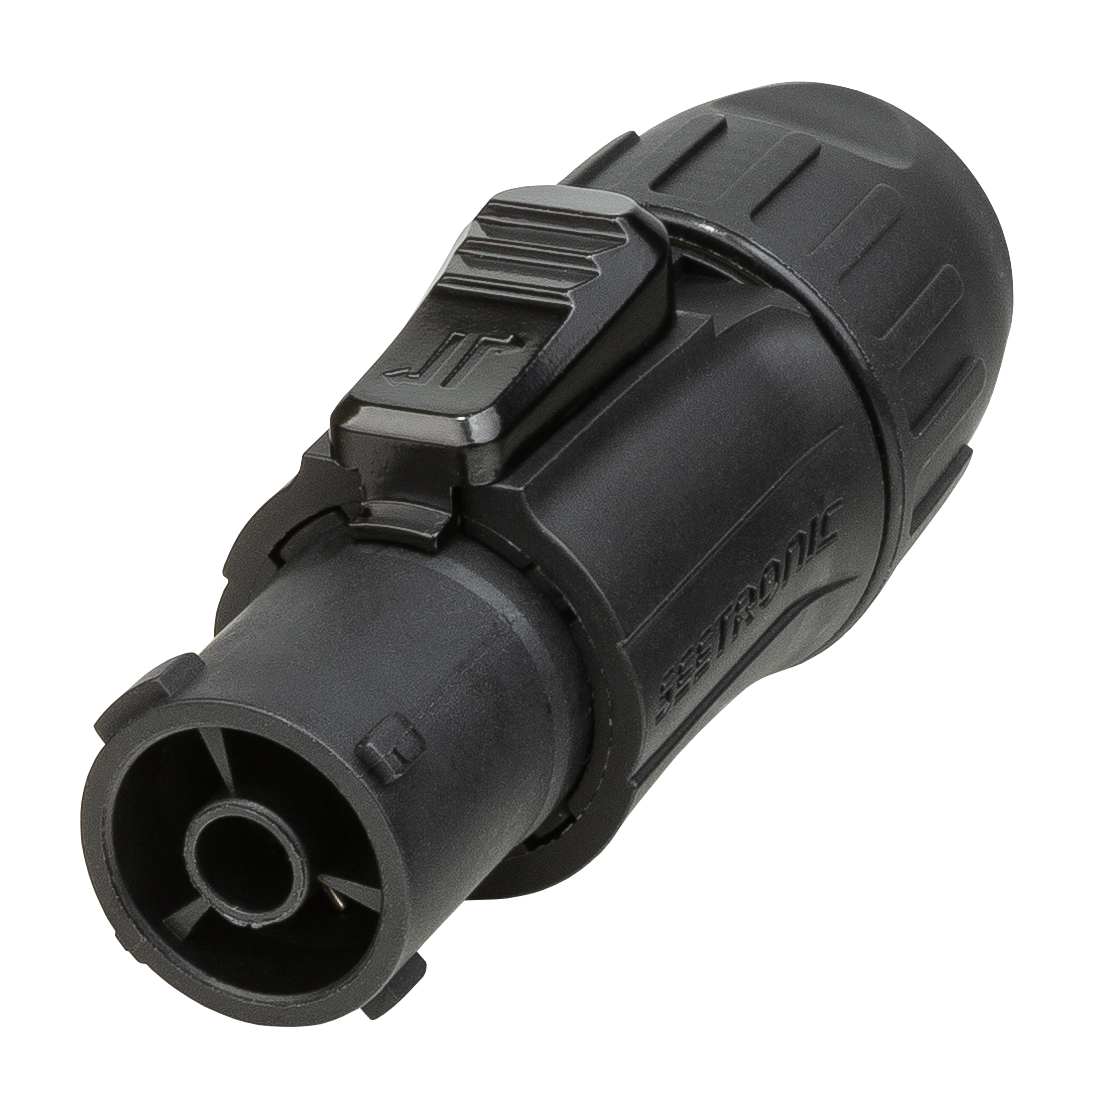 Seetronic IP65 locking female power connector for cable